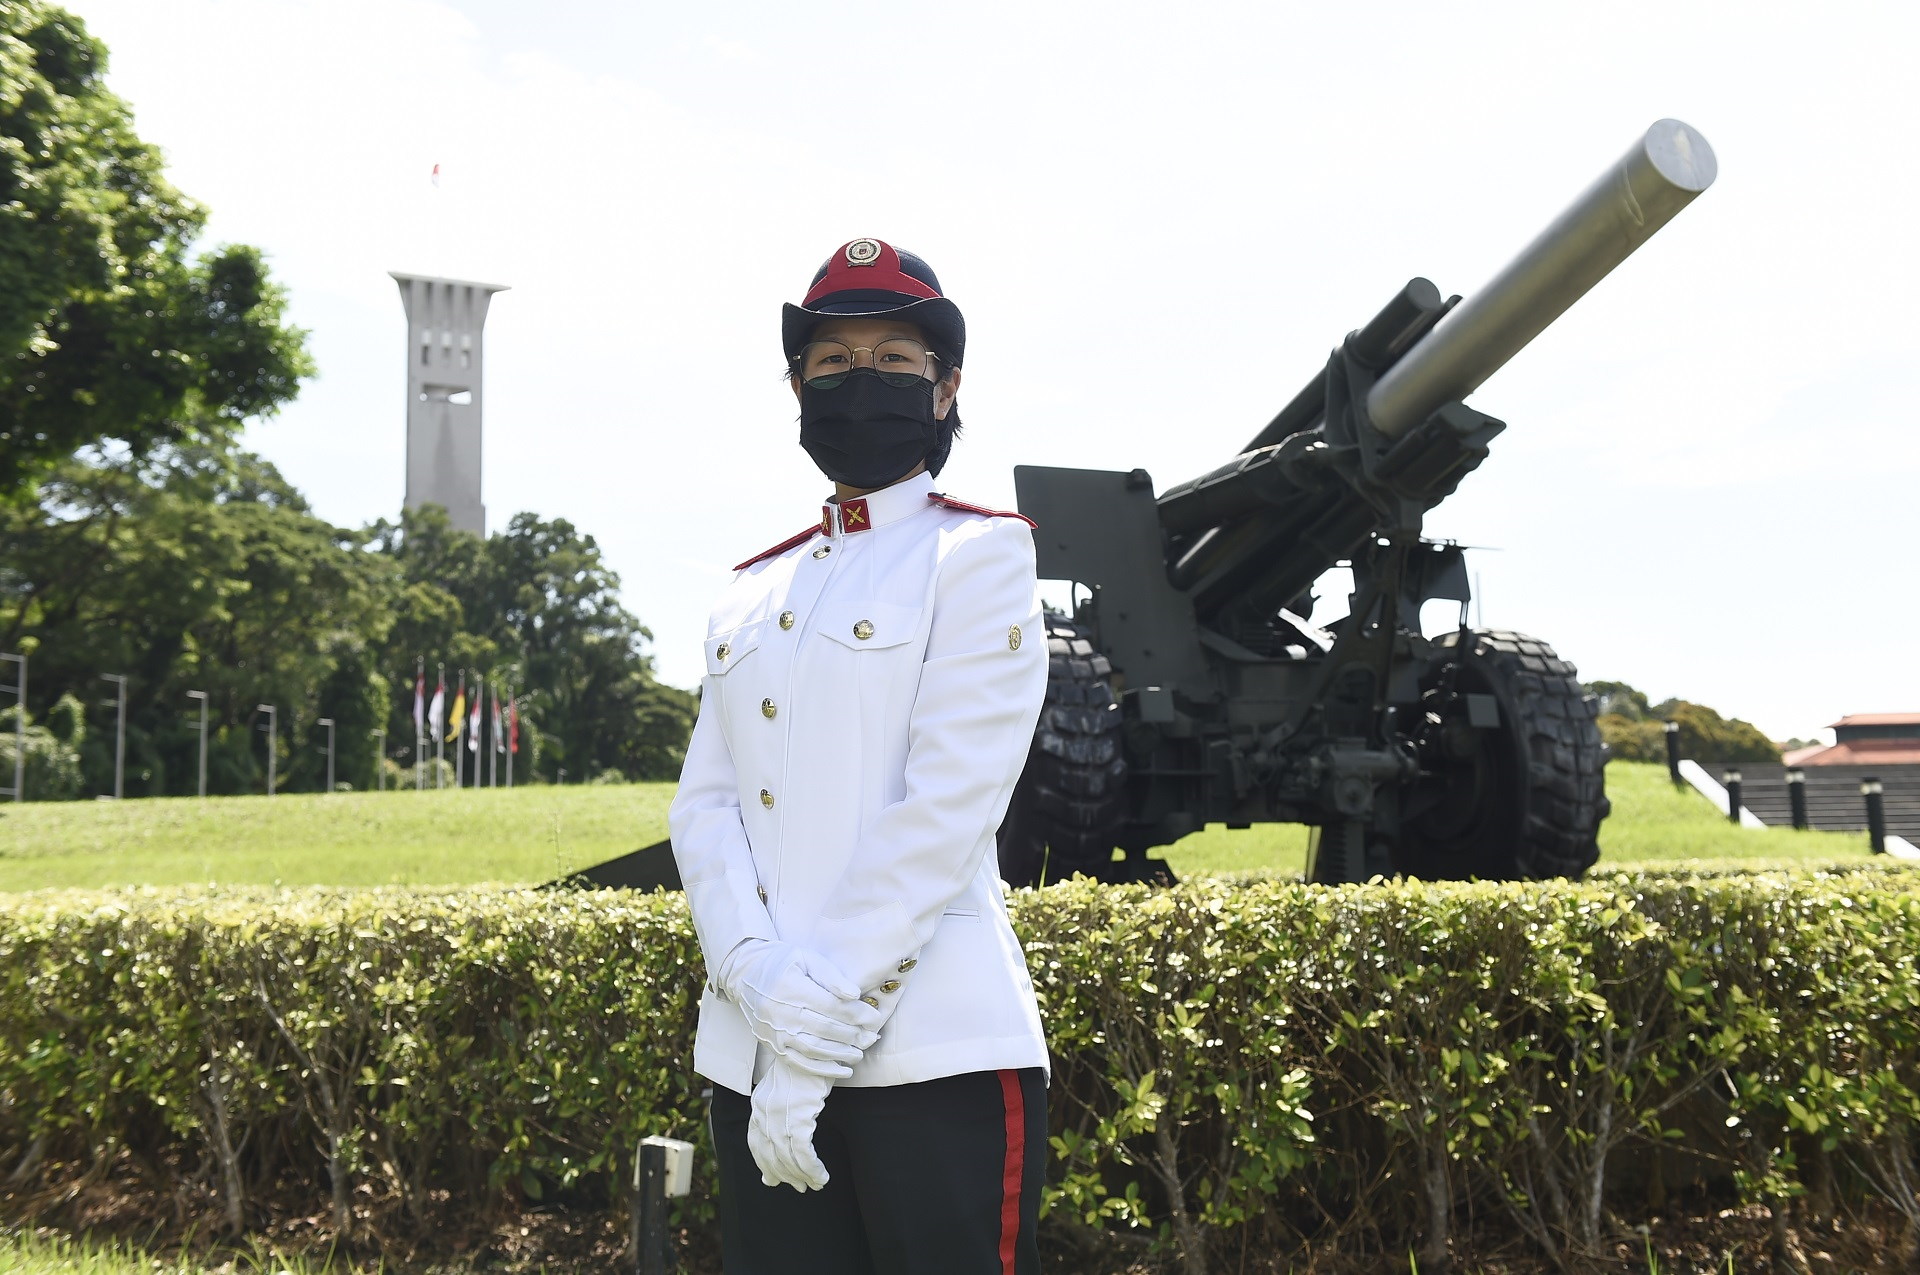 From air stewardess to artillery officer